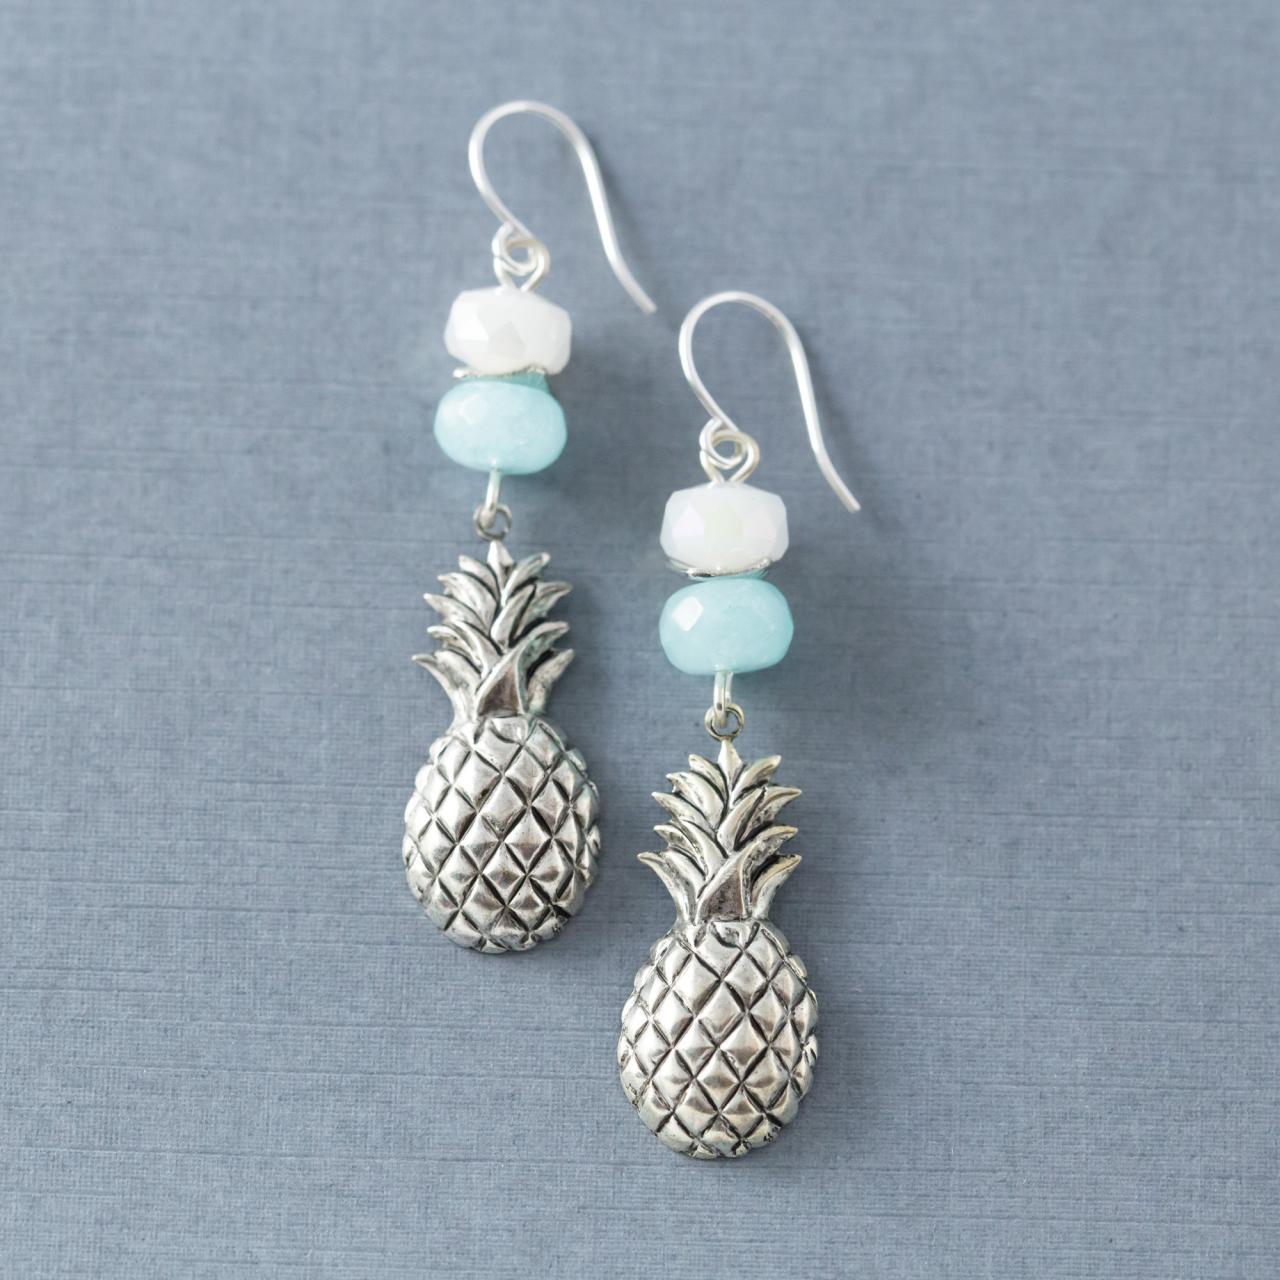 Silver Tone Pineapple Earrings With Blue Amazonite And White Faceted Glass Beads, Southern Jewelry, Fruit Jewelry